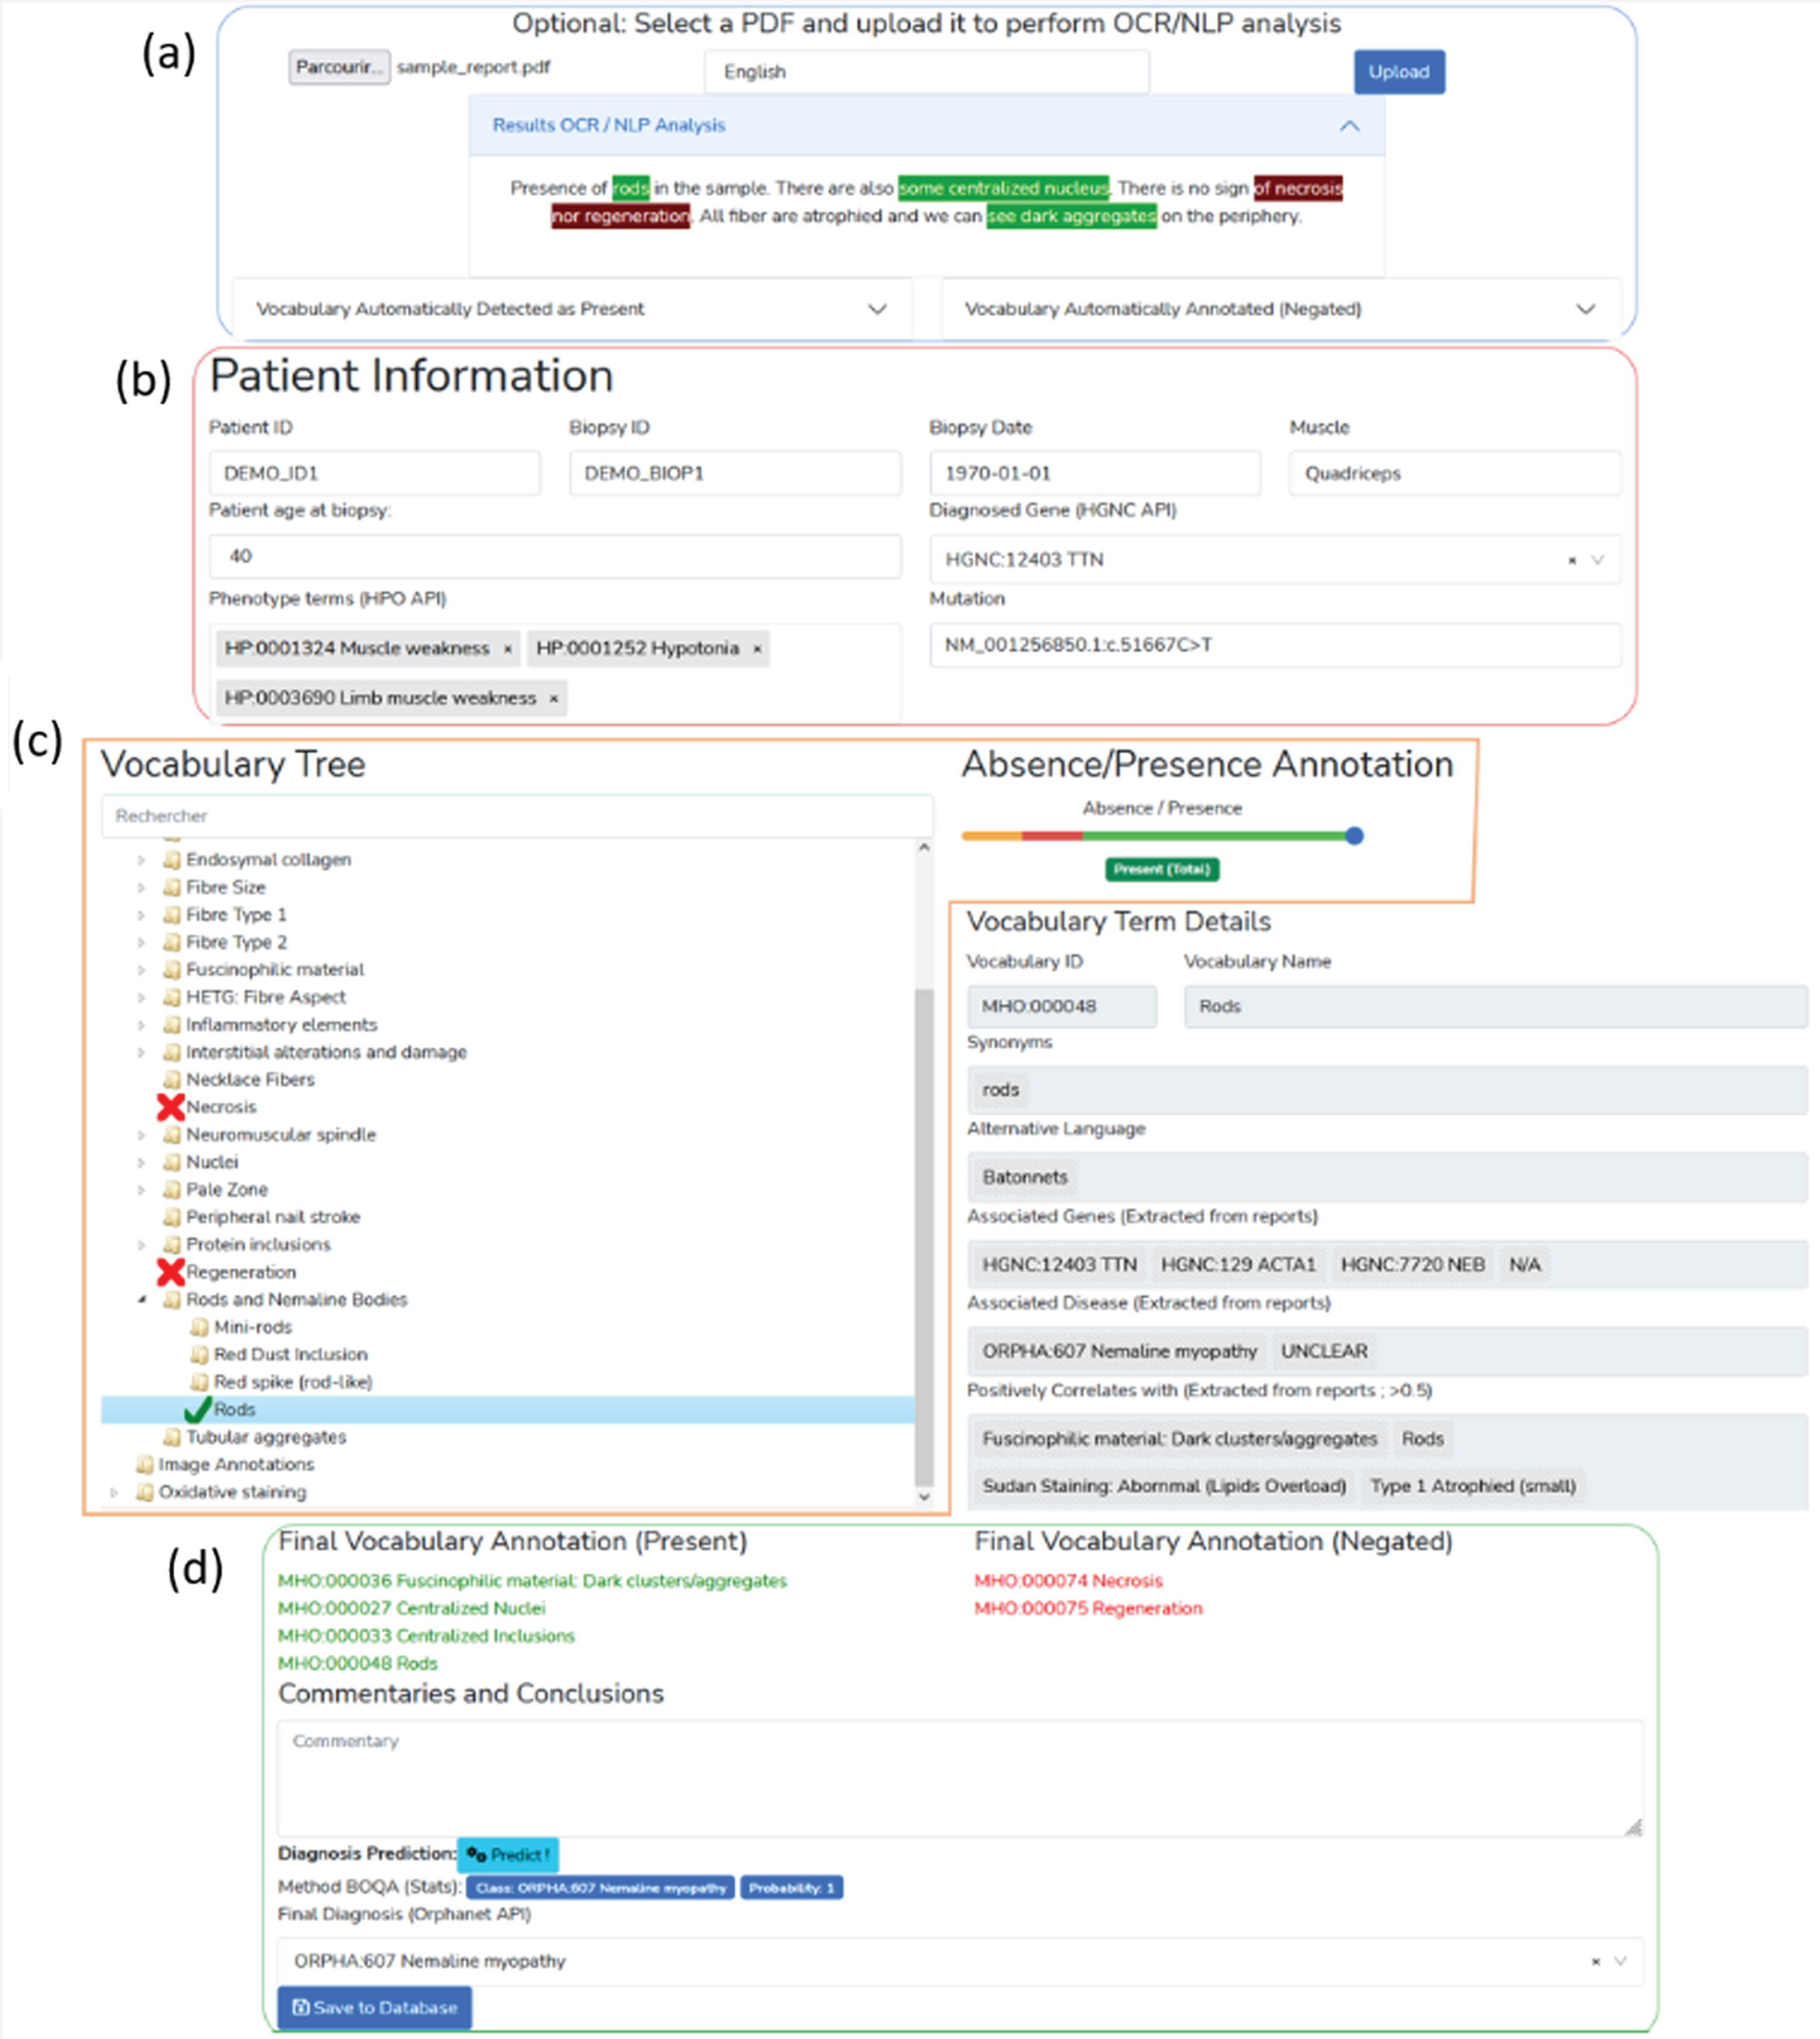 
Screenshot of the interface for the report digitalization module. (a) PDF upload section for automatic keyword detection in the text. Detected keywords have a green background, detected and negated keywords have a red background. (b) Patient information section (age, document ID, gene, mutation, phenotype). (c) Standard vocabulary tree viewer to select keywords with associated slider to manually indicate keyword value (absence or presence level). Keywords marked as present are indicated with a green check mark, absent keywords are marked with a red cross. (d) Overview section of all annotated terms, diagnosis selection and commentaries with automatic diagnosis support using the BOQA algorithm.